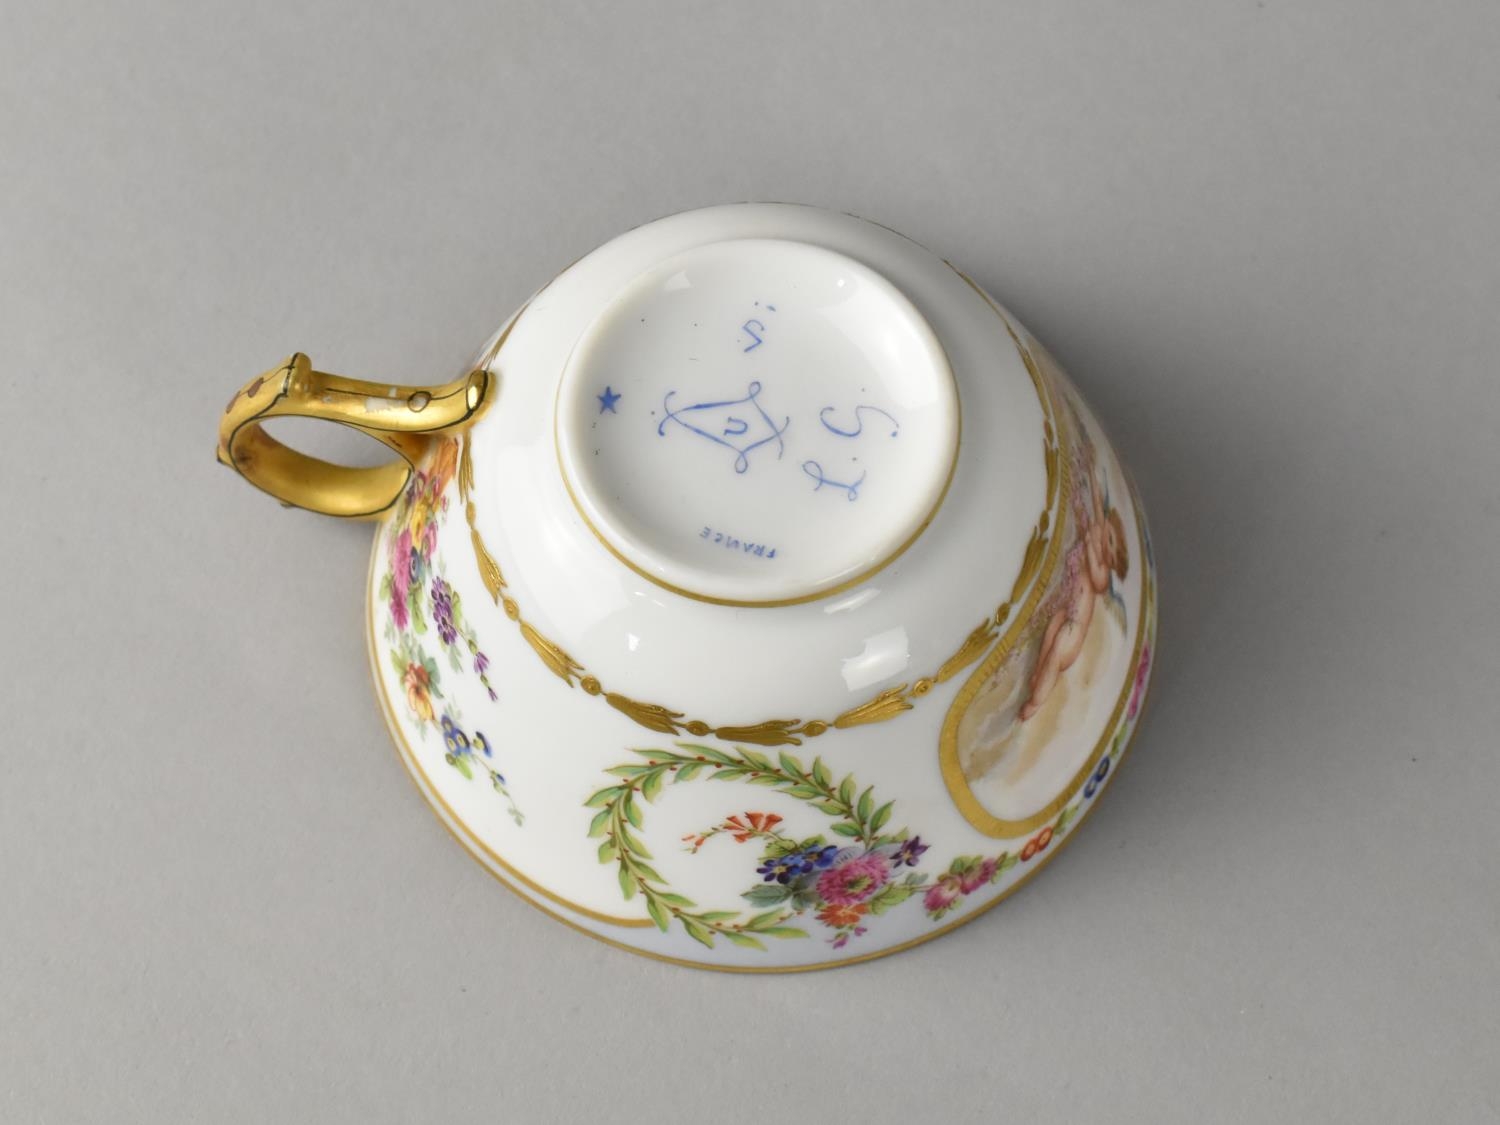 A Sevres Porcelain Cup Decorated with Cherub Cartouche with Gilt Detailing, Laurel Wreaths and - Image 4 of 4